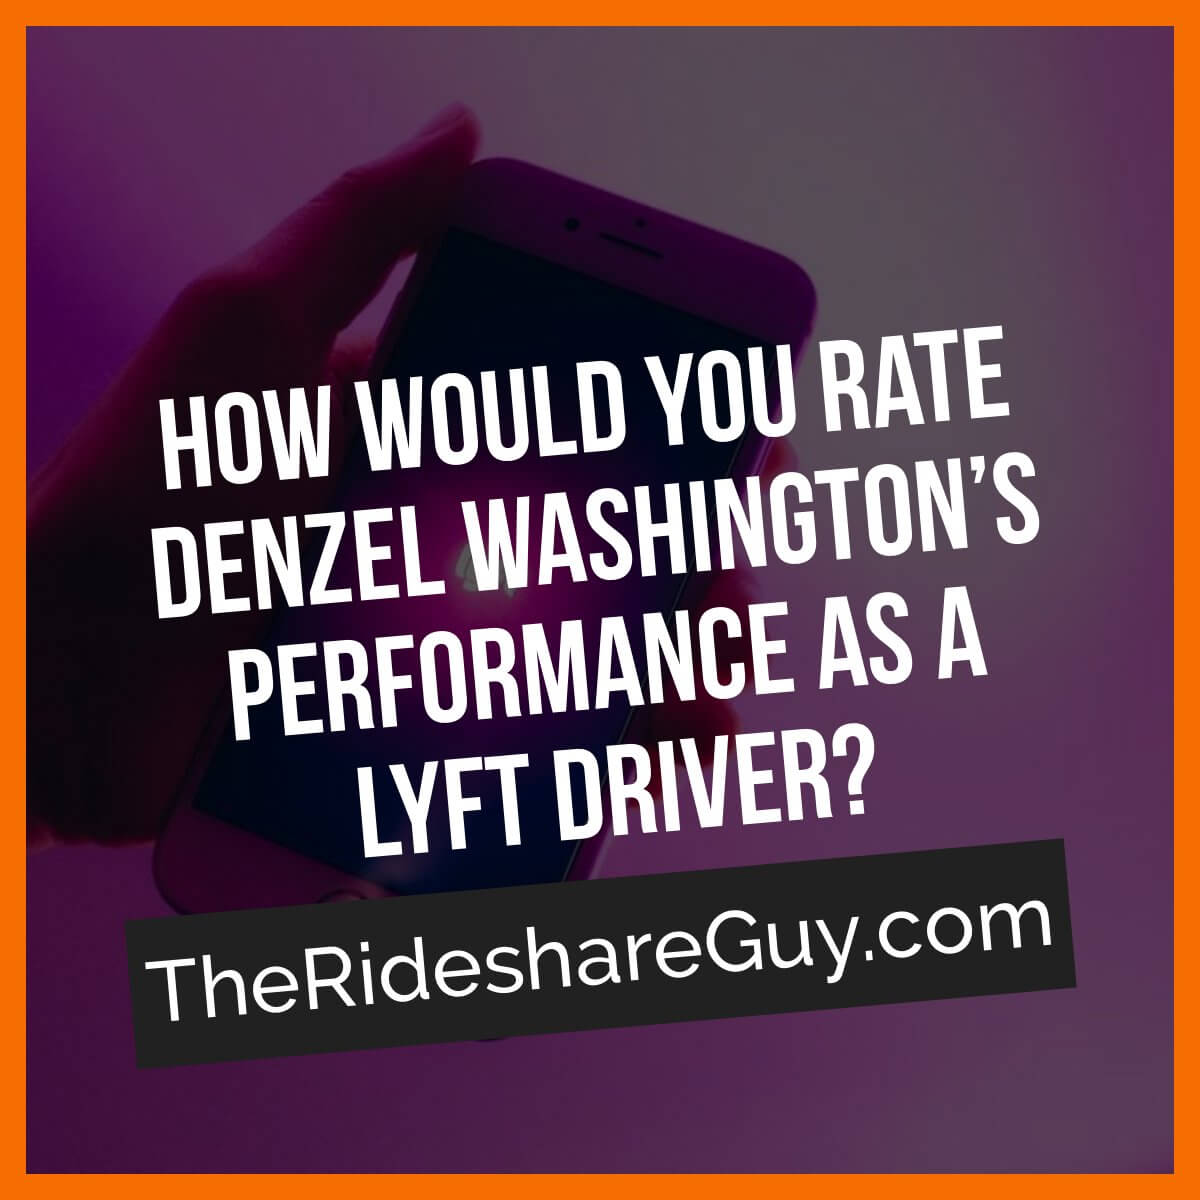 Have you ever watched a movie, TV show or music video that featured Lyft or Uber logos? Maybe someone was actually “working” as a driver. We wanted to know how realistic these portrayals are and if there are takeaways for drivers, so we had senior RSG contributor Will Preston break down one of the latest movies to prominently feature rideshare driving, the movie The Equalizer 2 starring Denzel Washington.